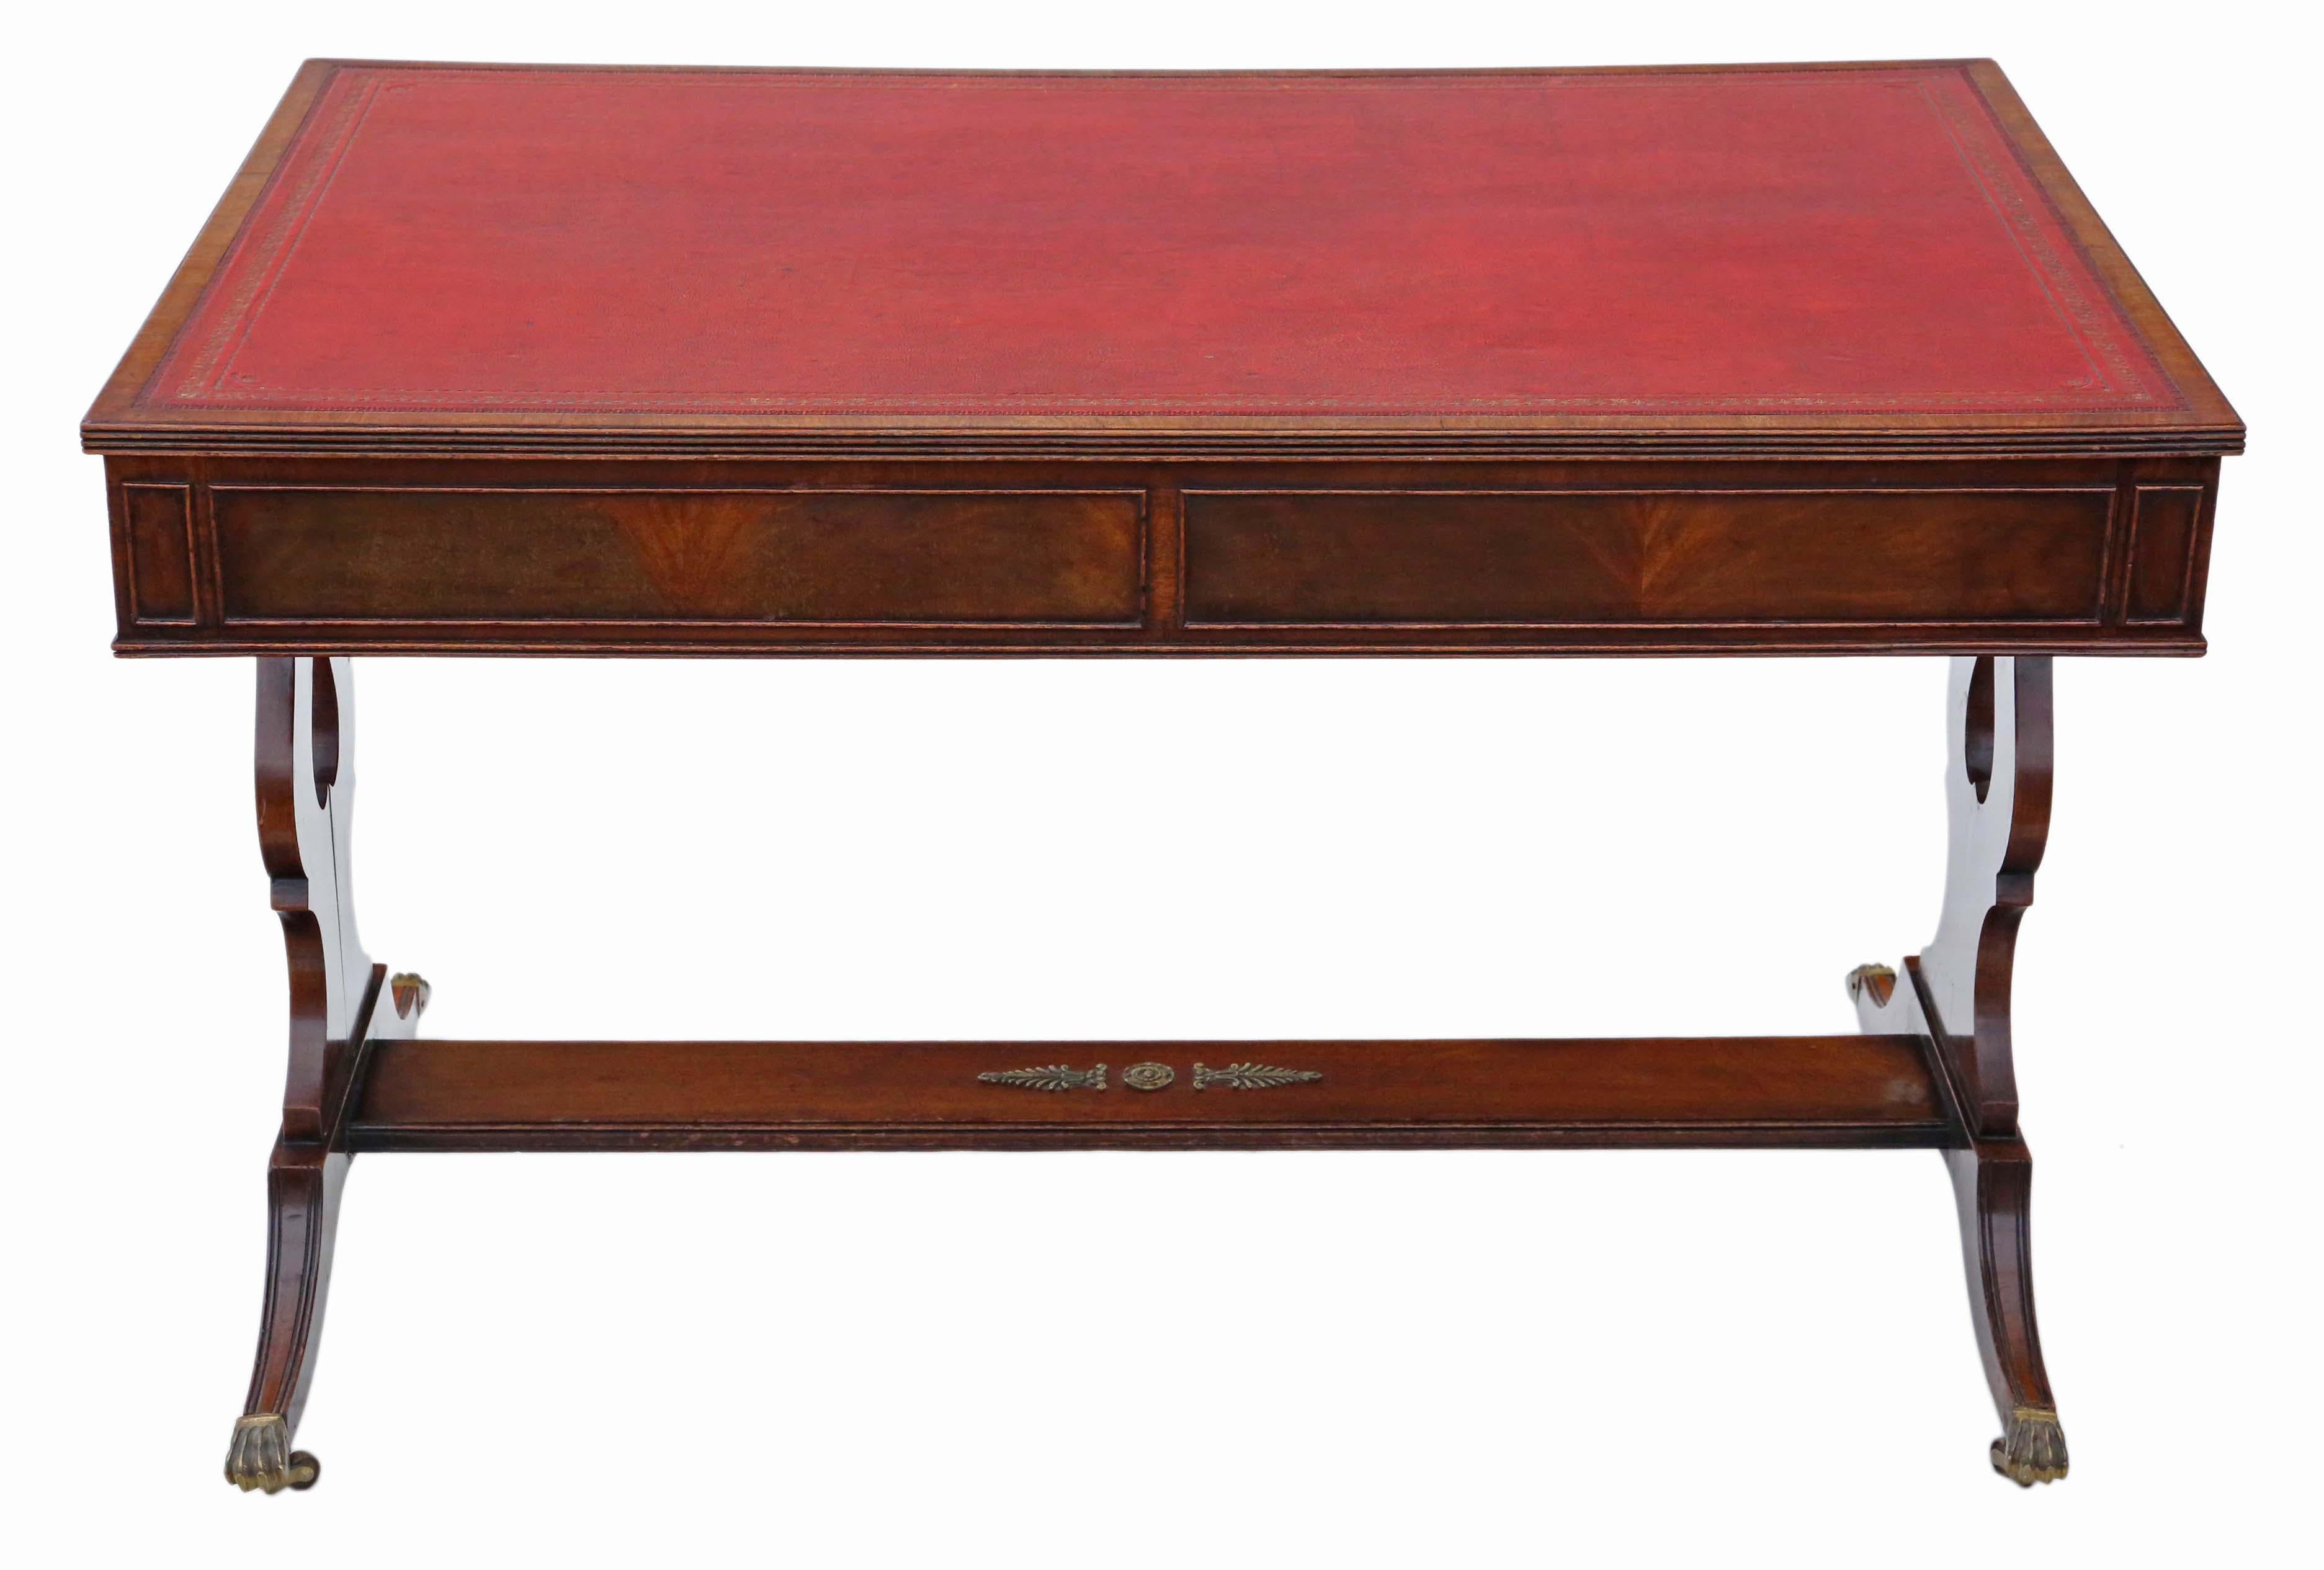 Antique Flame Mahogany Writing Table Desk 19th Century Revival, C1920 7